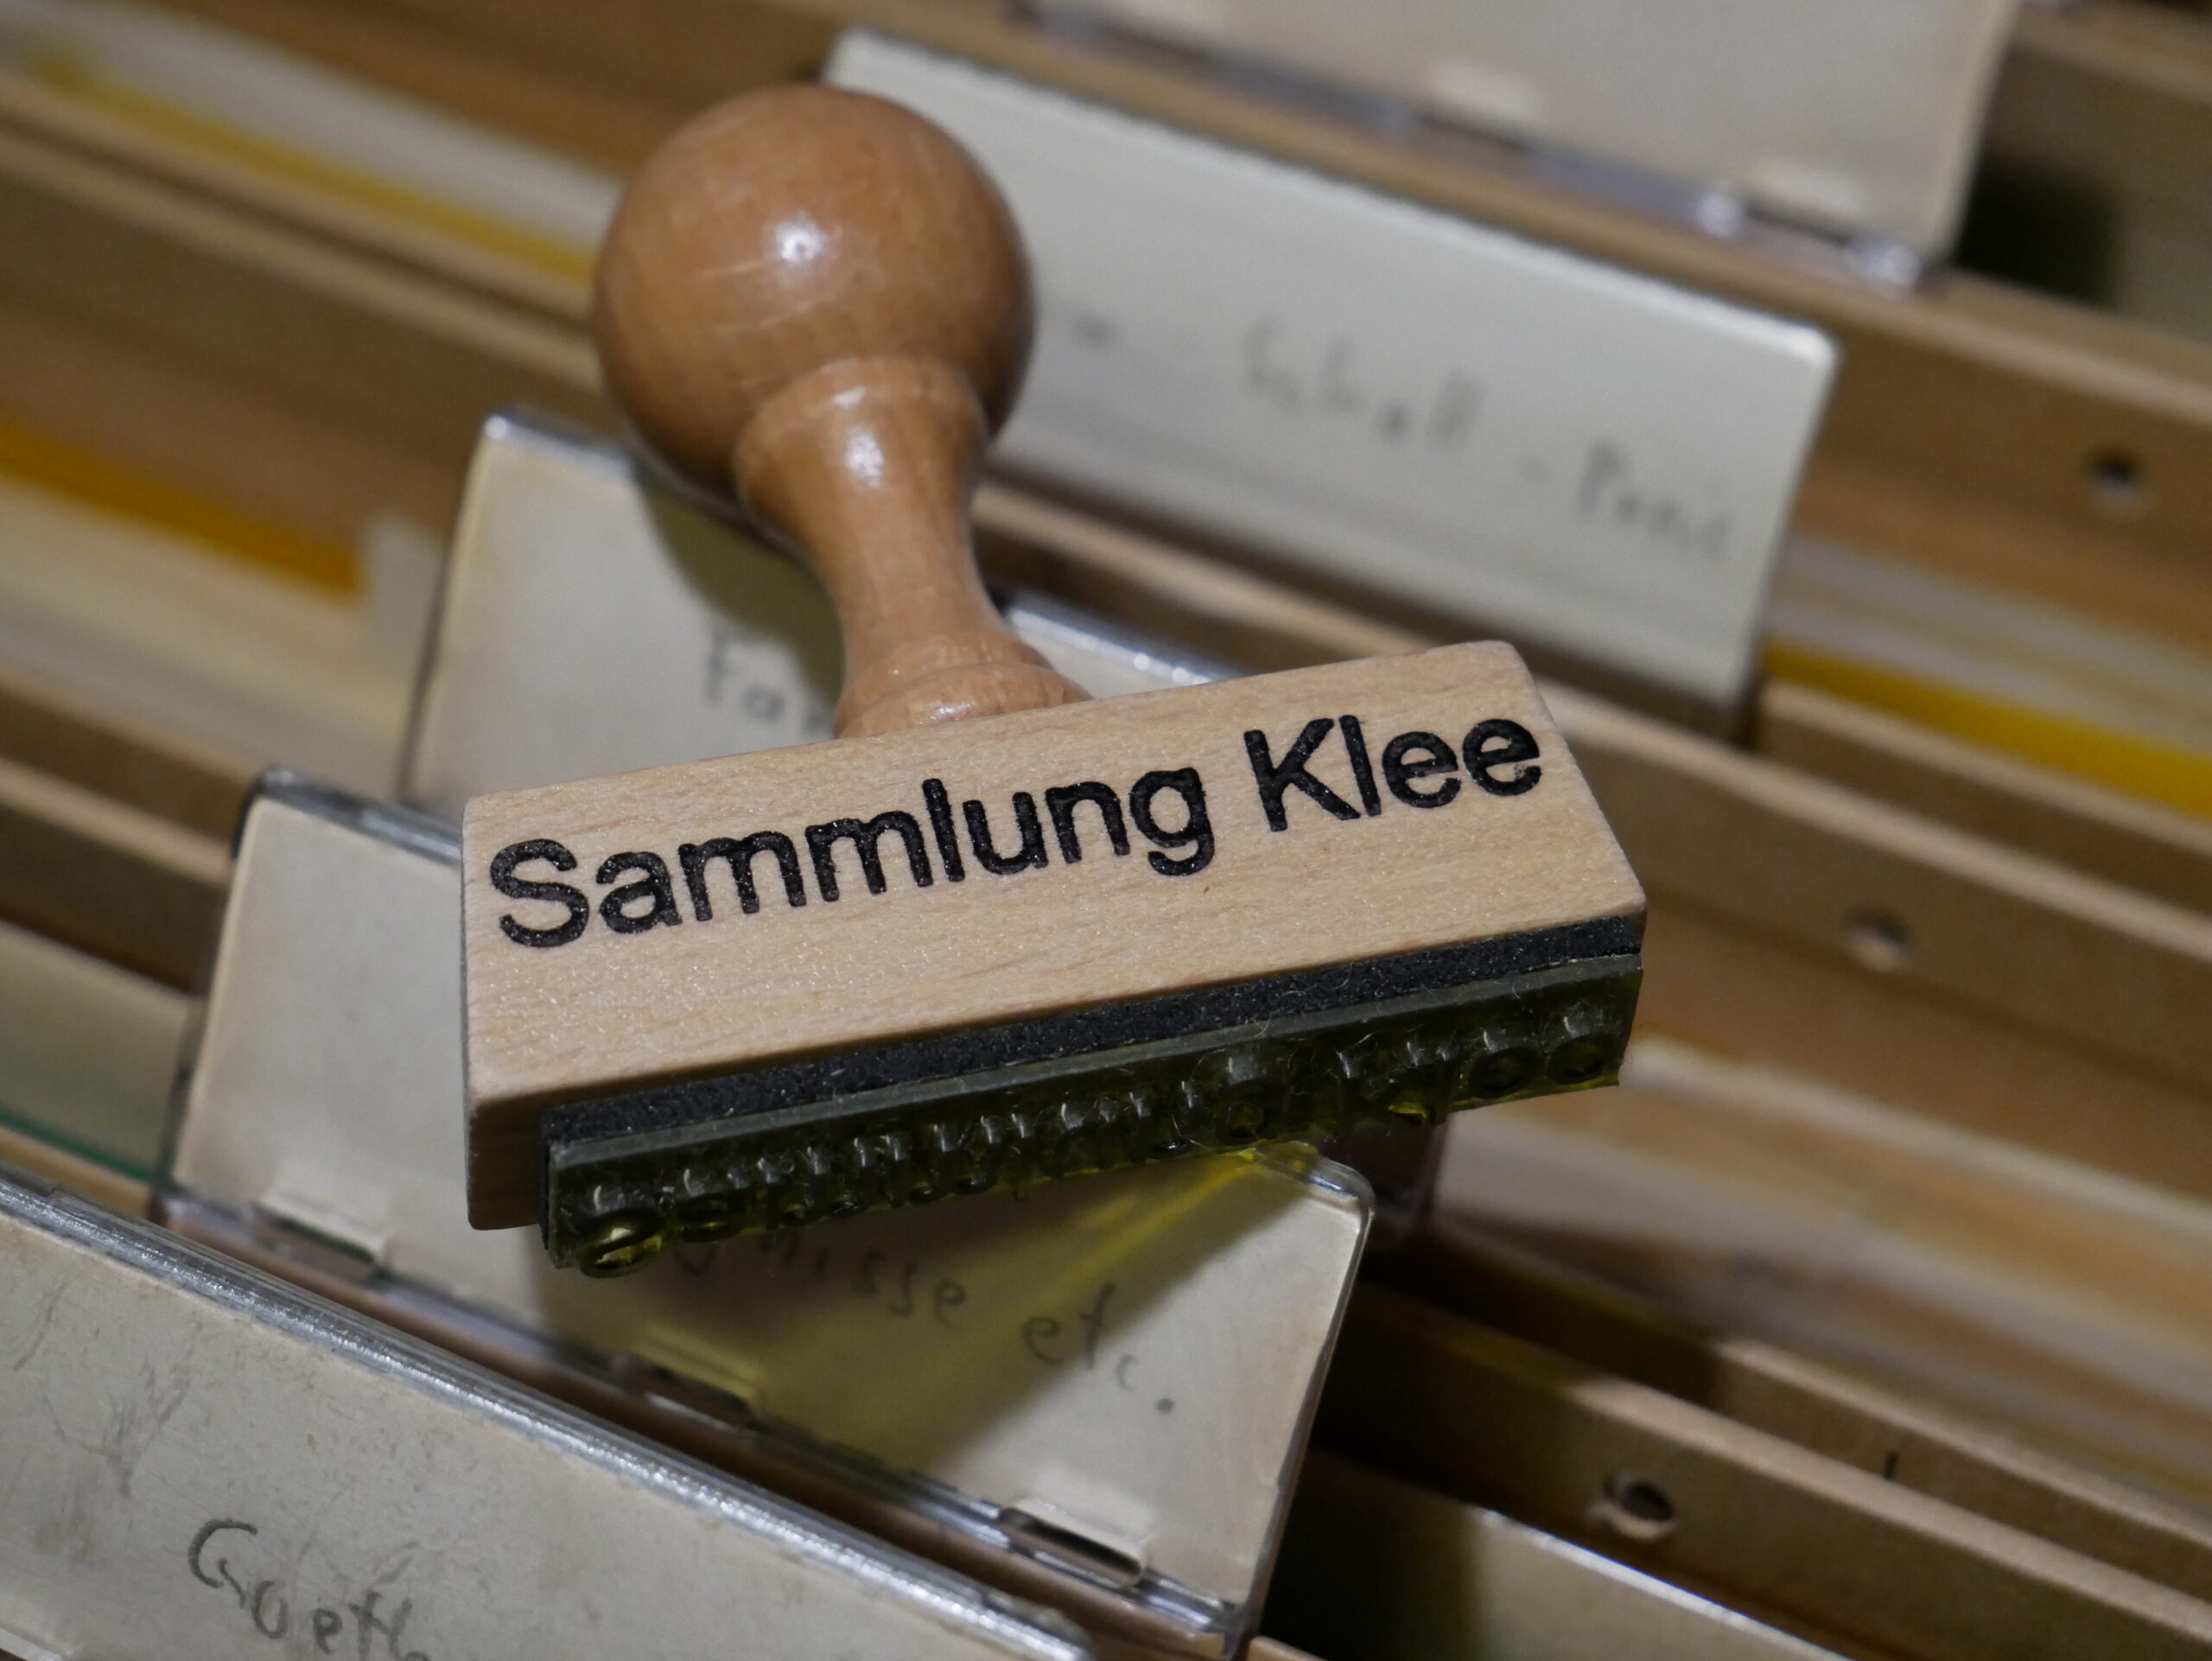 Colour photo of a wooden stamp bearing the inscription "Klee collection", as translated. There are blurred files in the background.